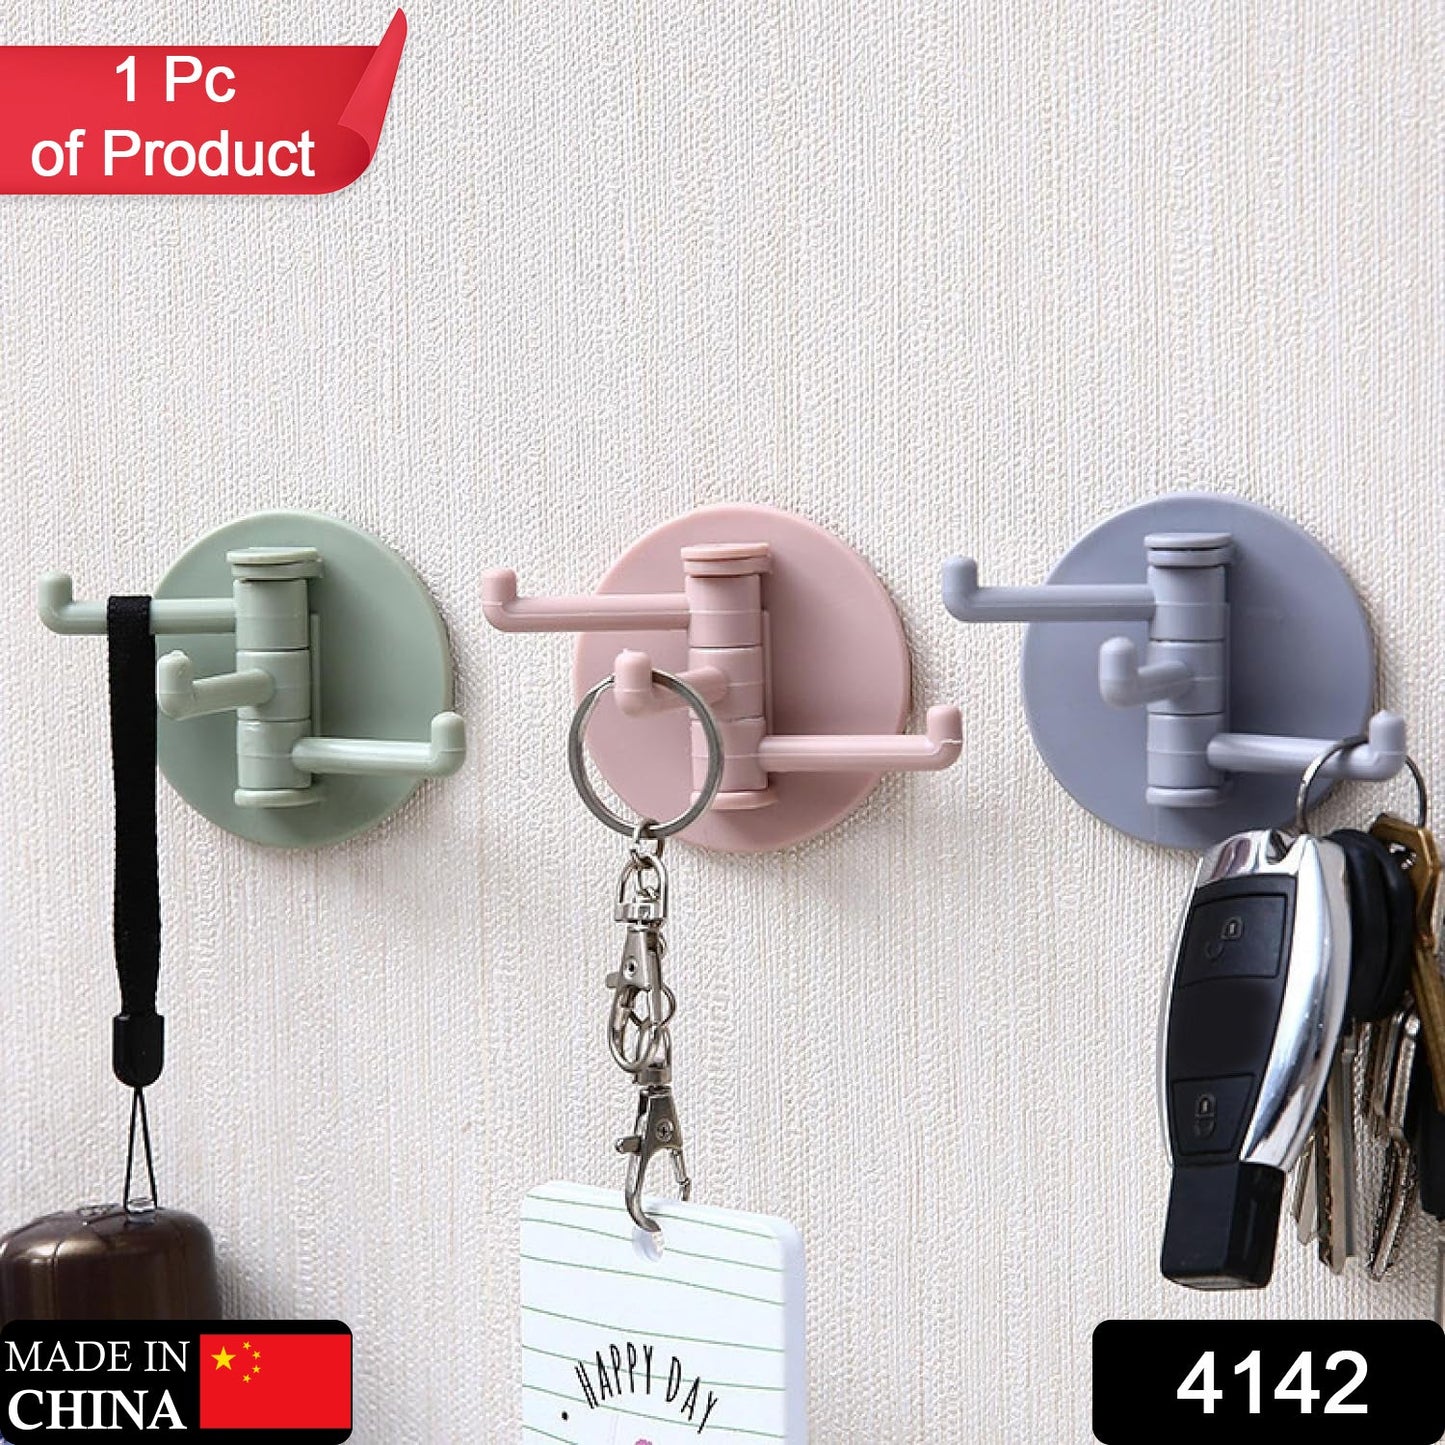 4142 Sticky Hook Household Strong Punch-Free Hook, 180°Foldable Multi-Function Rotatable Hook with 3 Hooks, Suitable for Bathroom, Kitchen, Office (1 Pc)